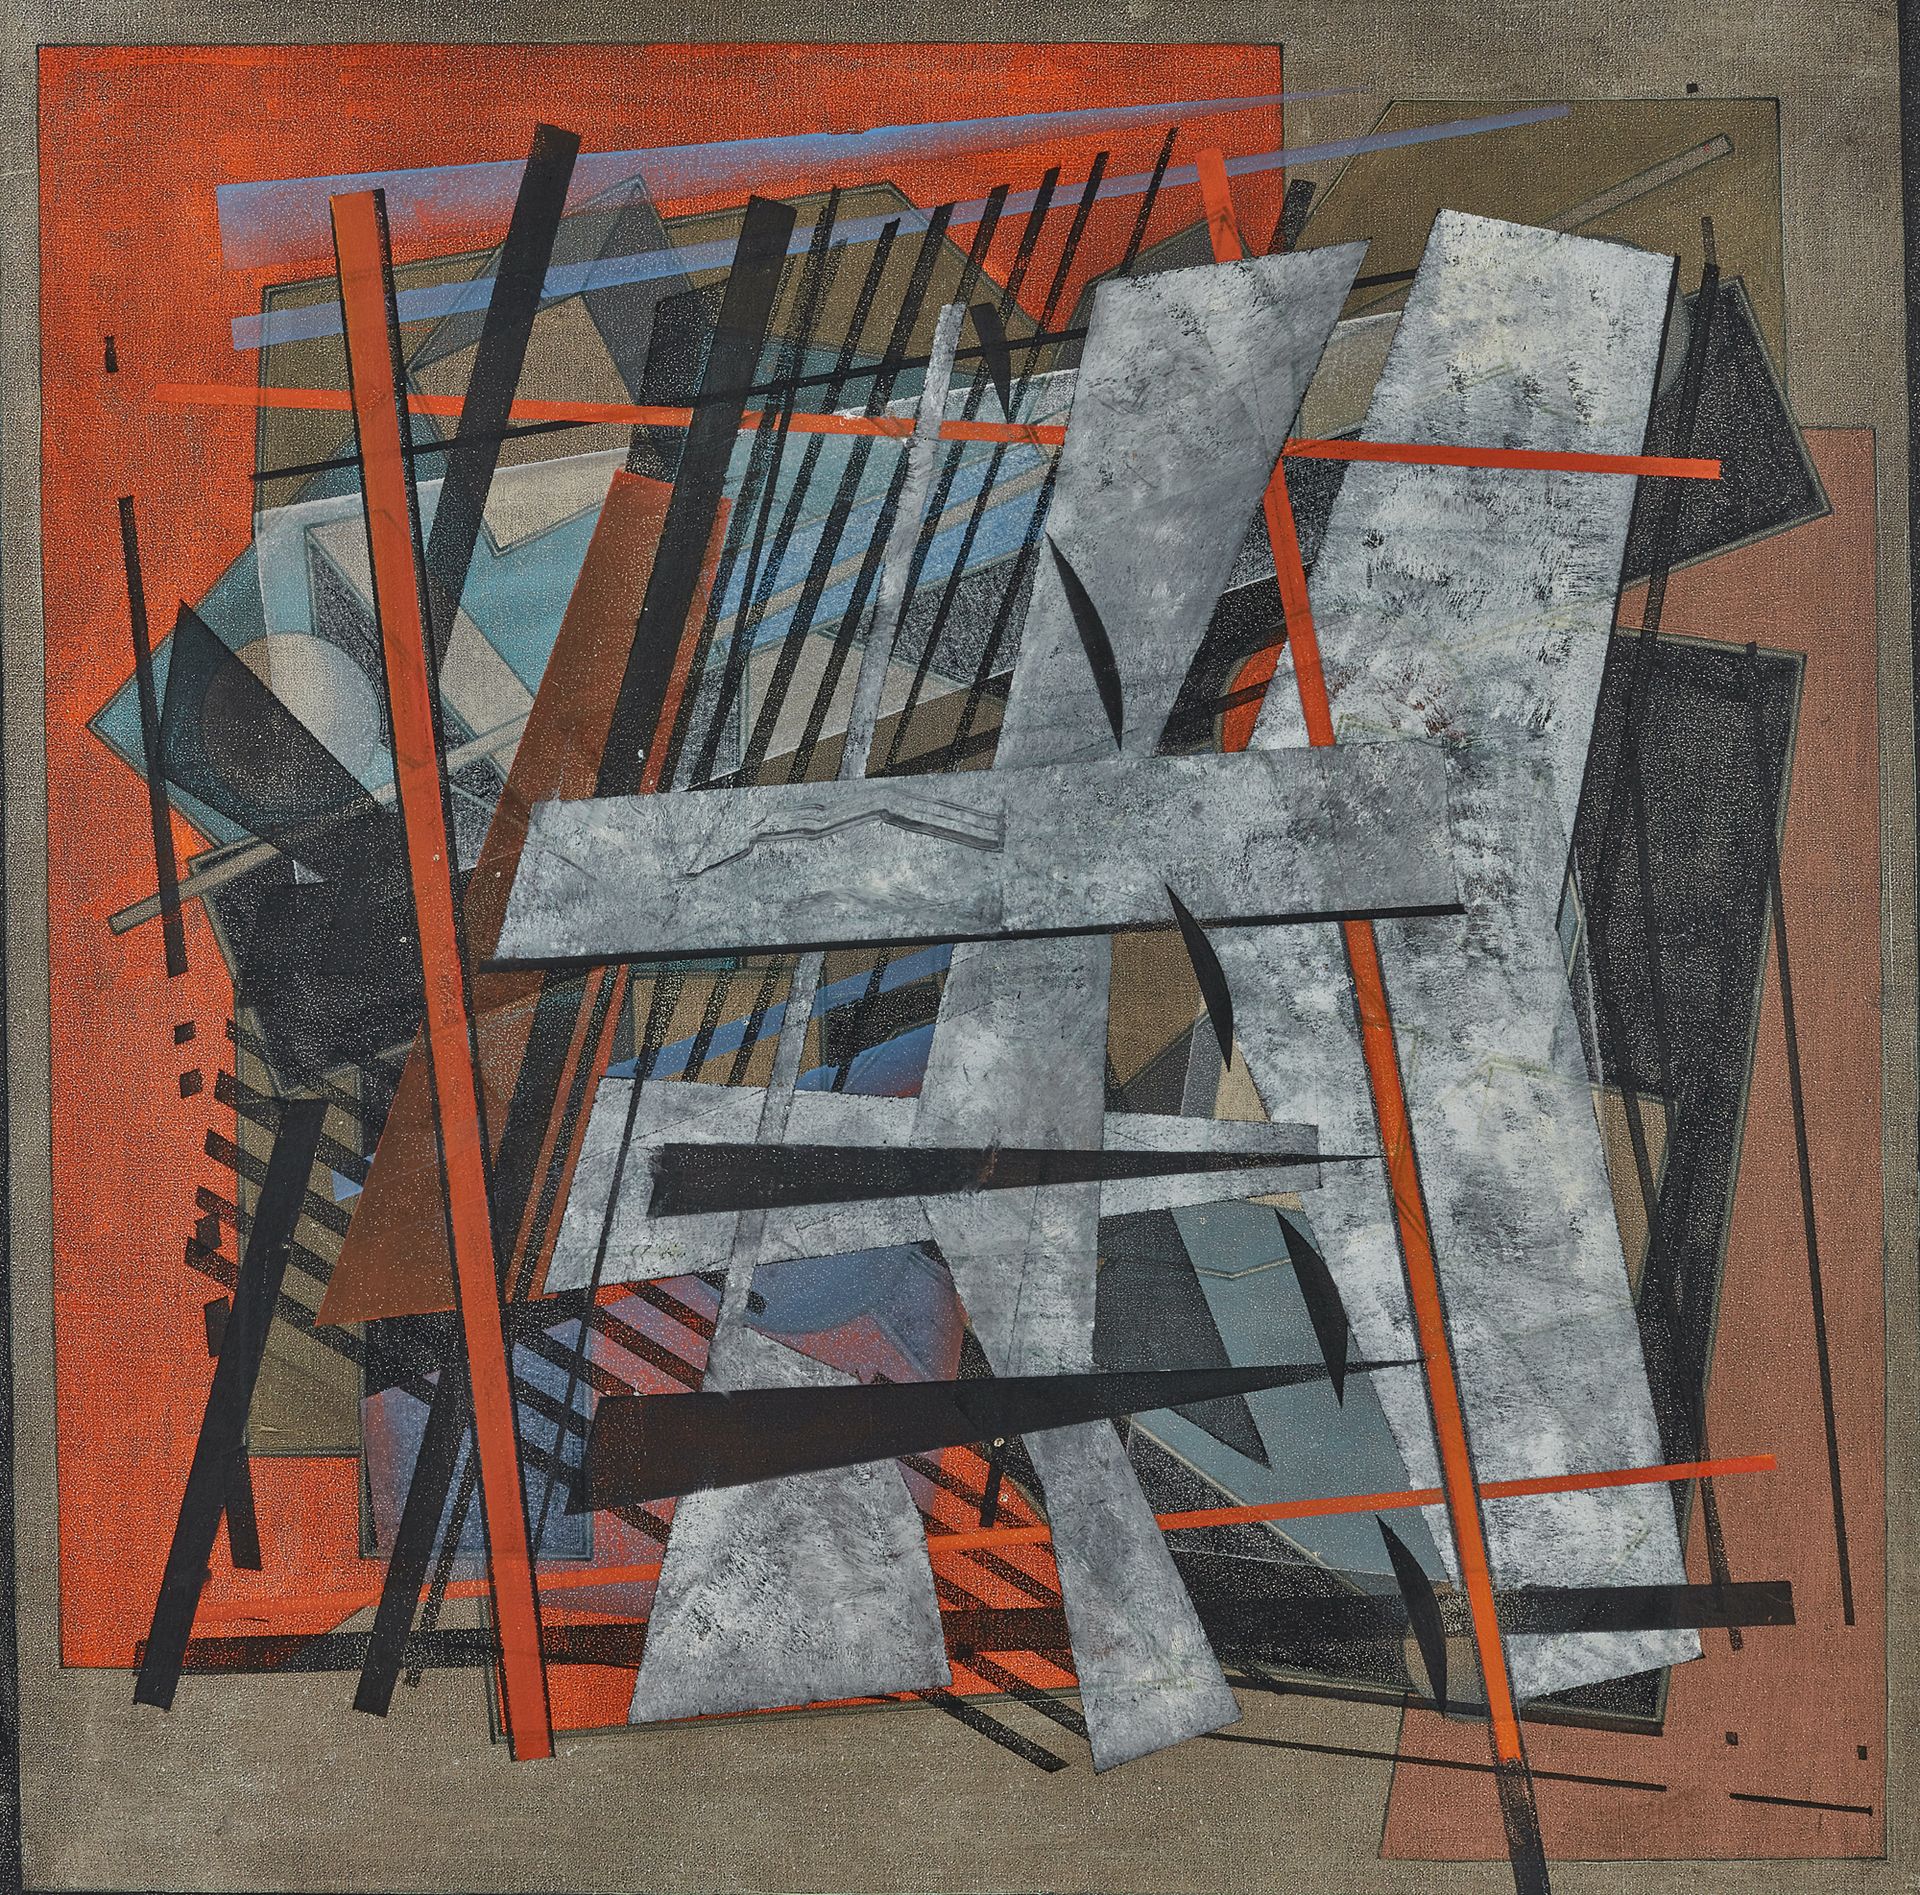 Alain Le YAOUANC (1940) Composition
Mixed media on canvas, unsigned
80 x 80 cm